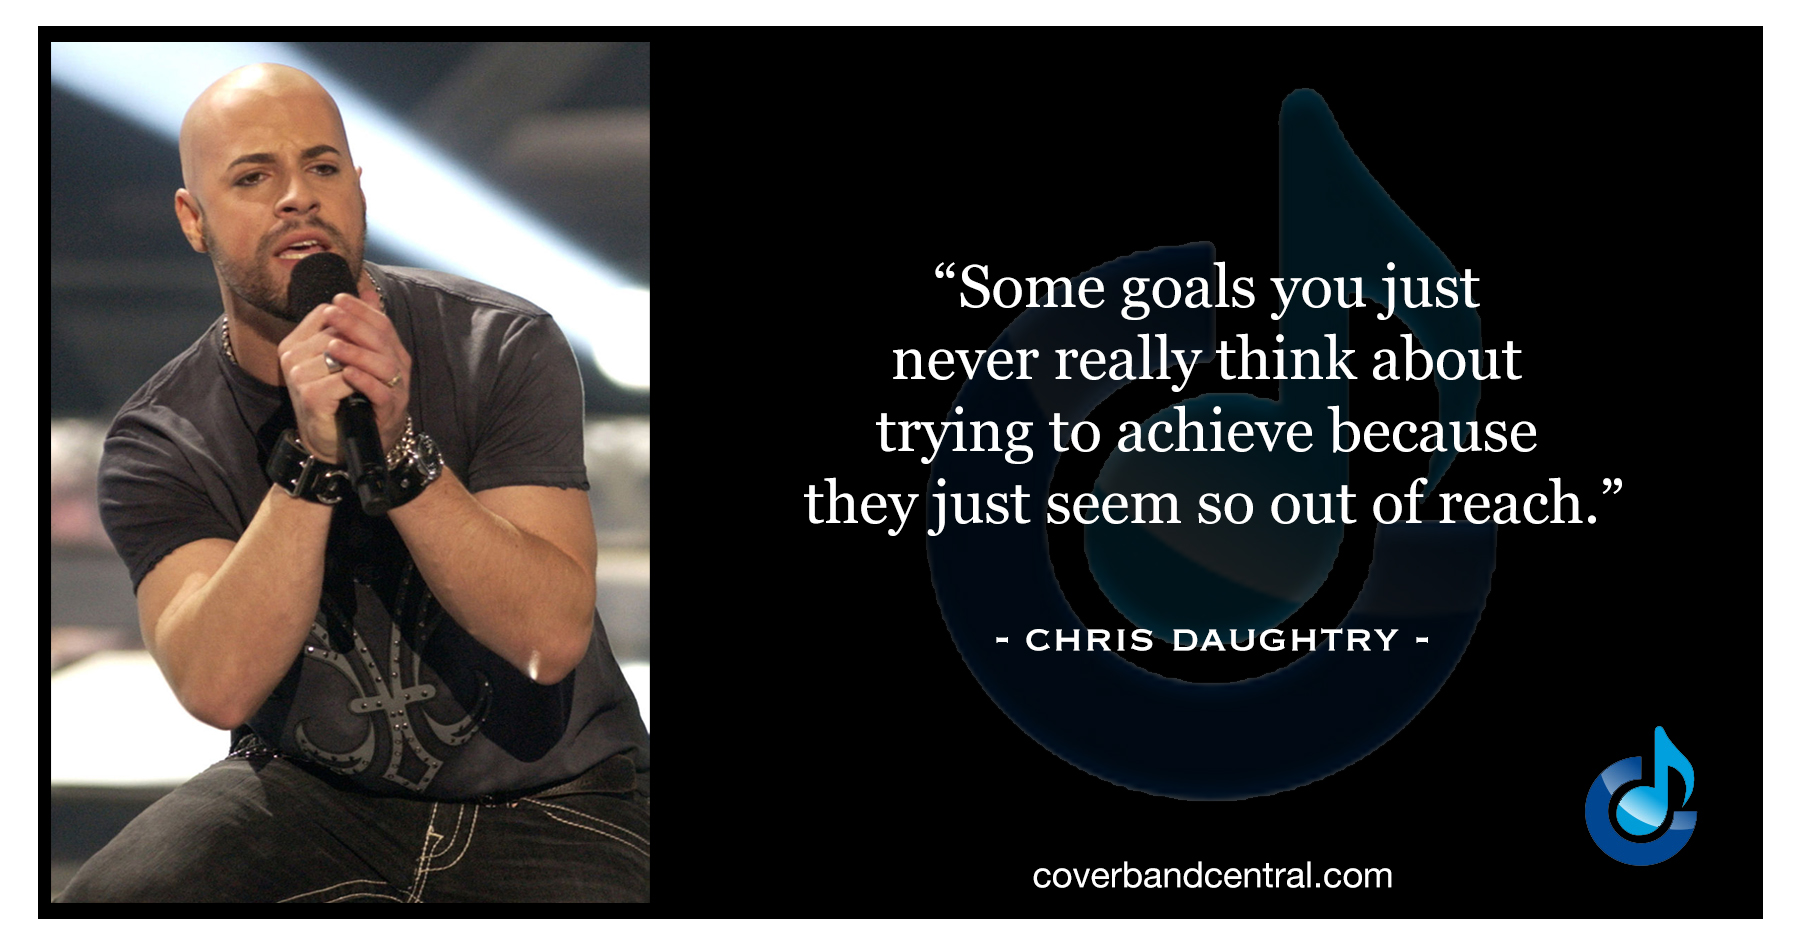 Chris Daughtry quote